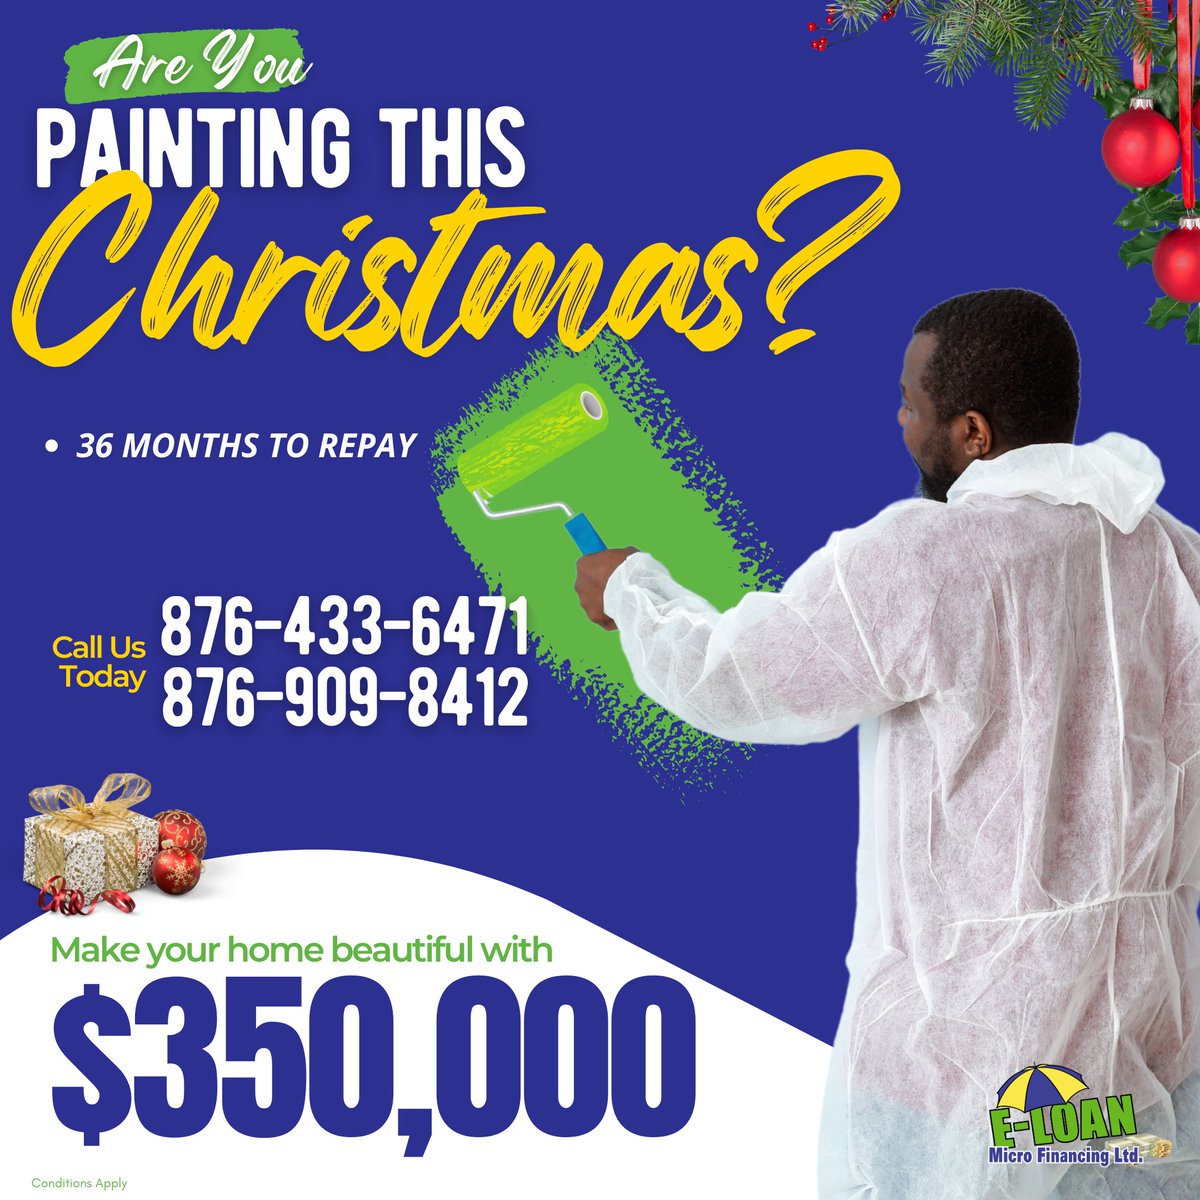 Planning on Painting this Christmas?
Let us help you with all your expenses at #EloanMFLimited
We can give you up to $350,000 in loans.
Apply Today.

e-loanmicrofinancing.com

#loancompanyinmontegobay #ChristmasTreeMontegobay #HarmonyBeach #jamaicaloancompany #BestLoanCompany